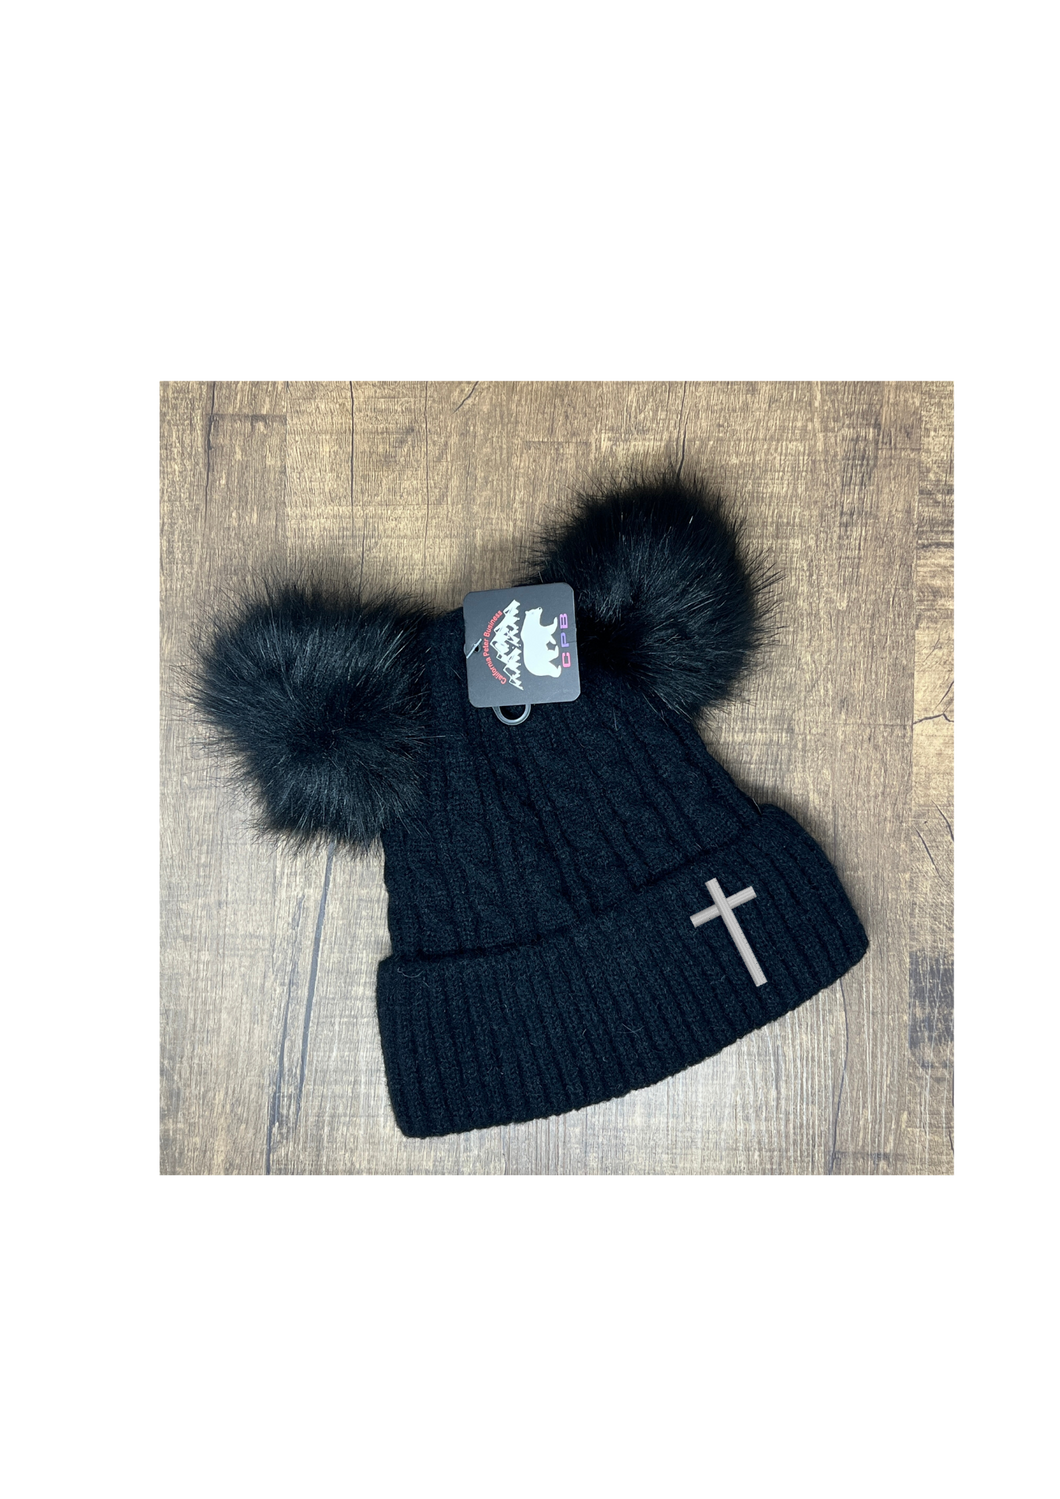 Toboggan - Black with embroidered cross, double puff ball